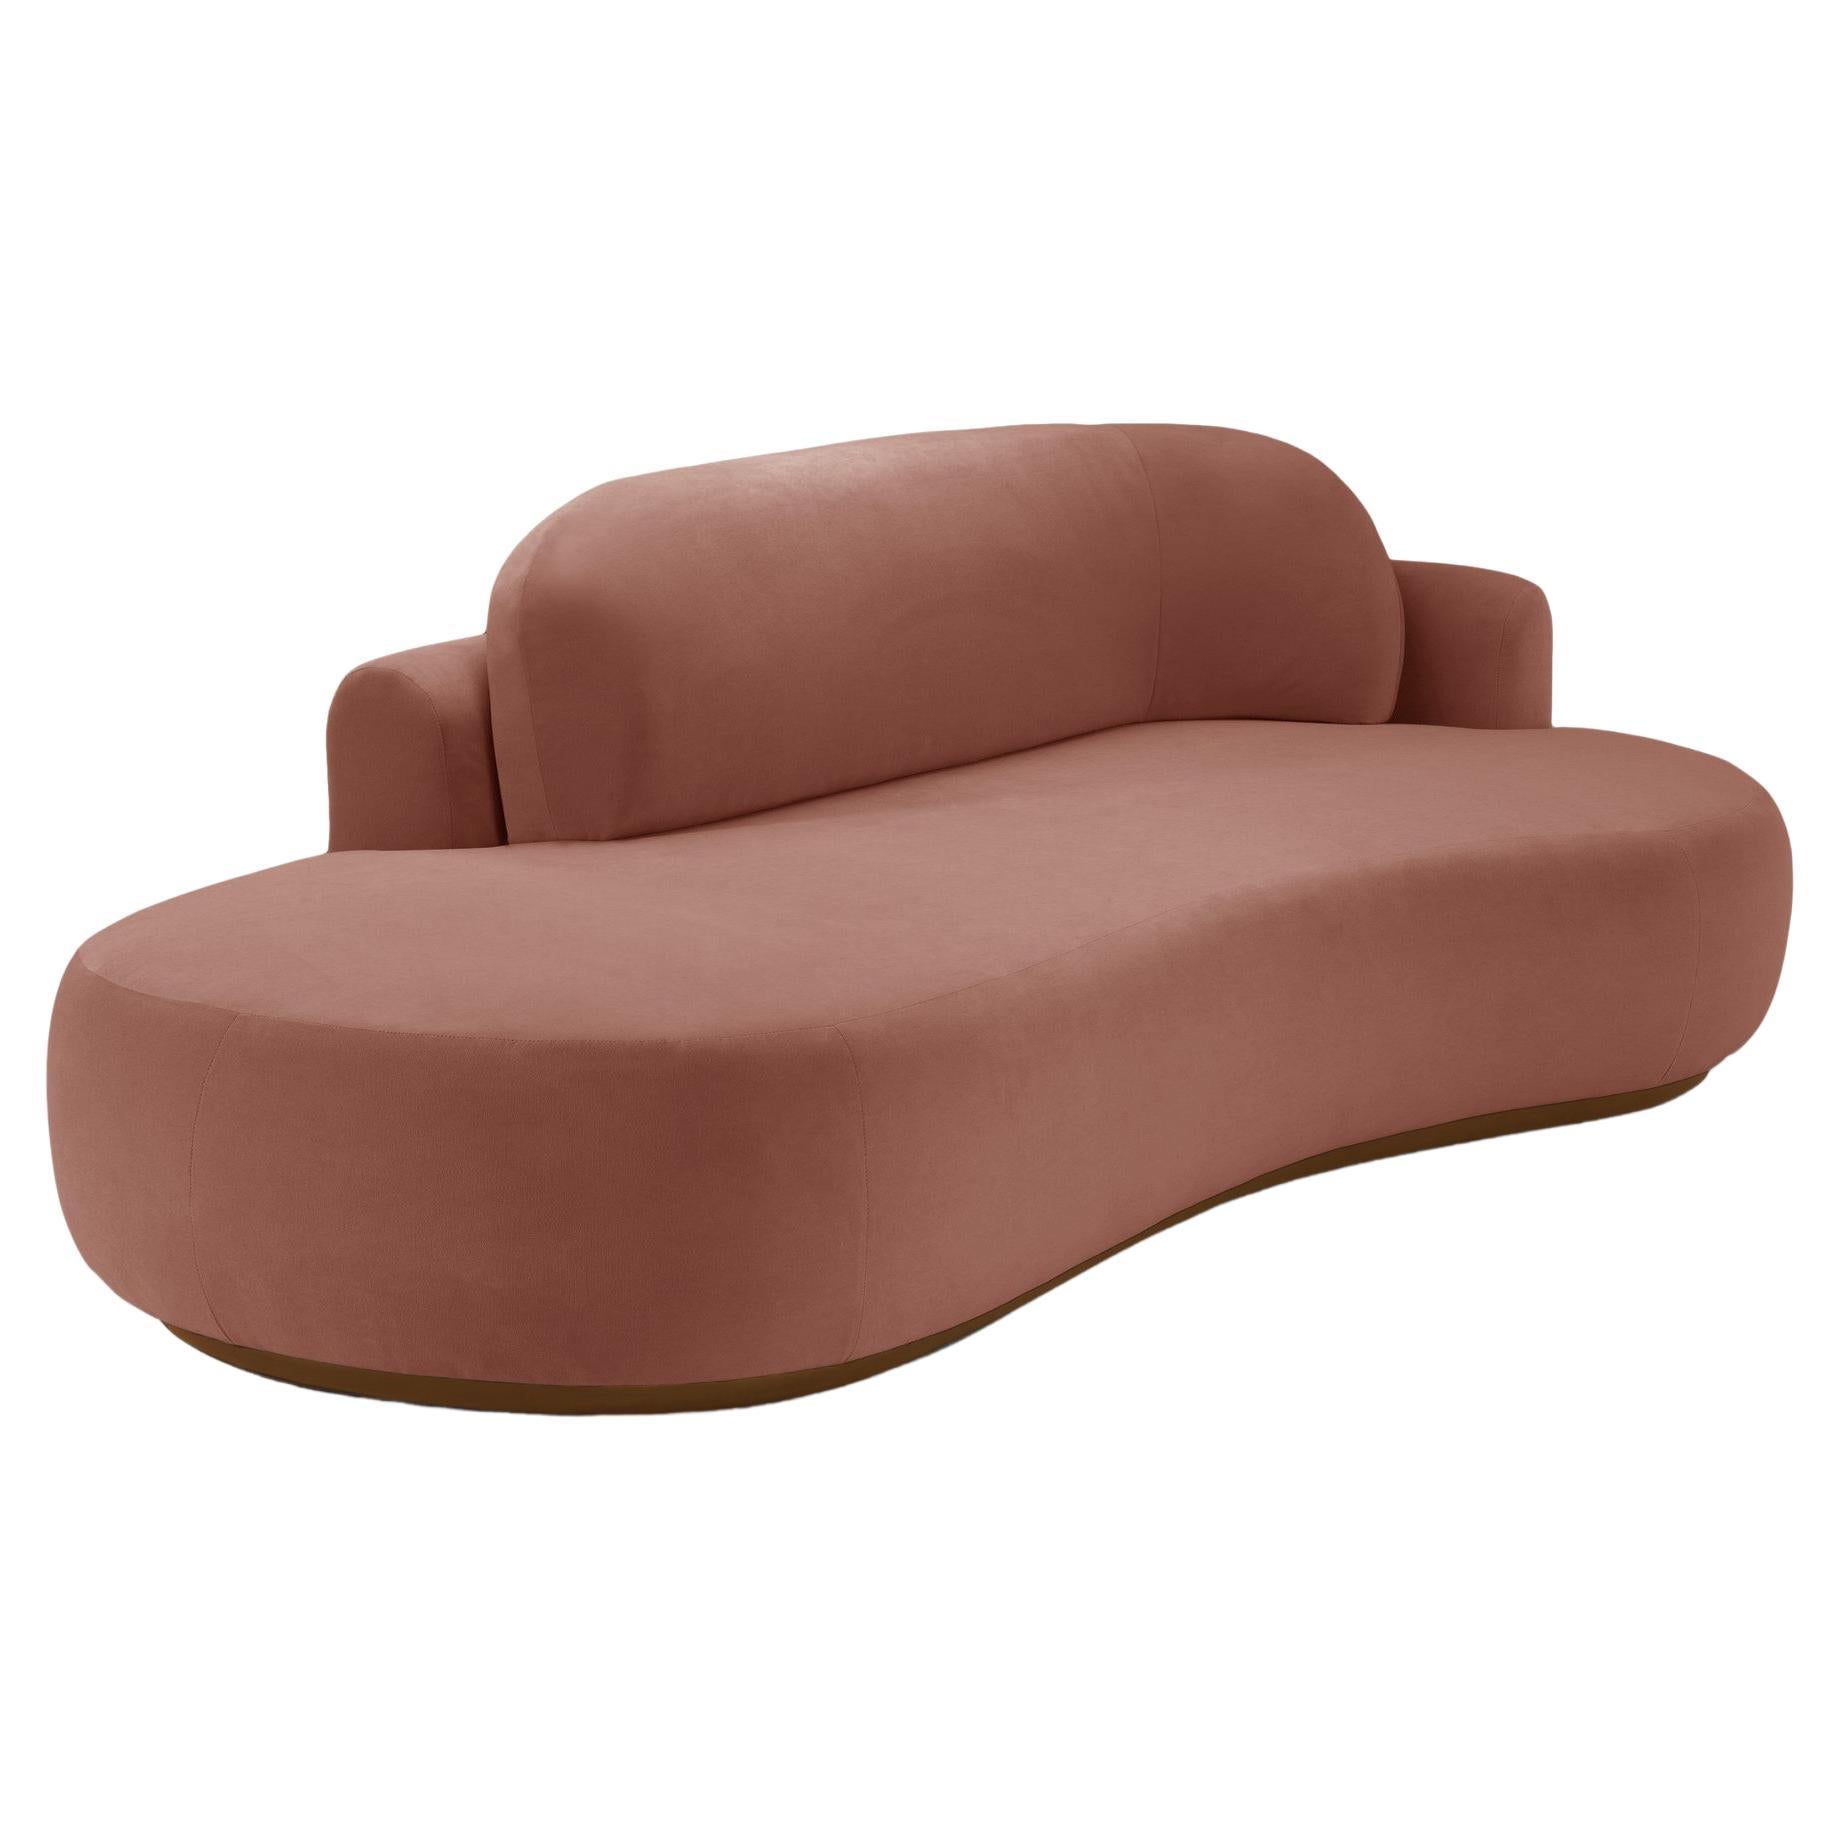 Naked Sofa Single with Beech Ash-056-1 and Paris Brick For Sale